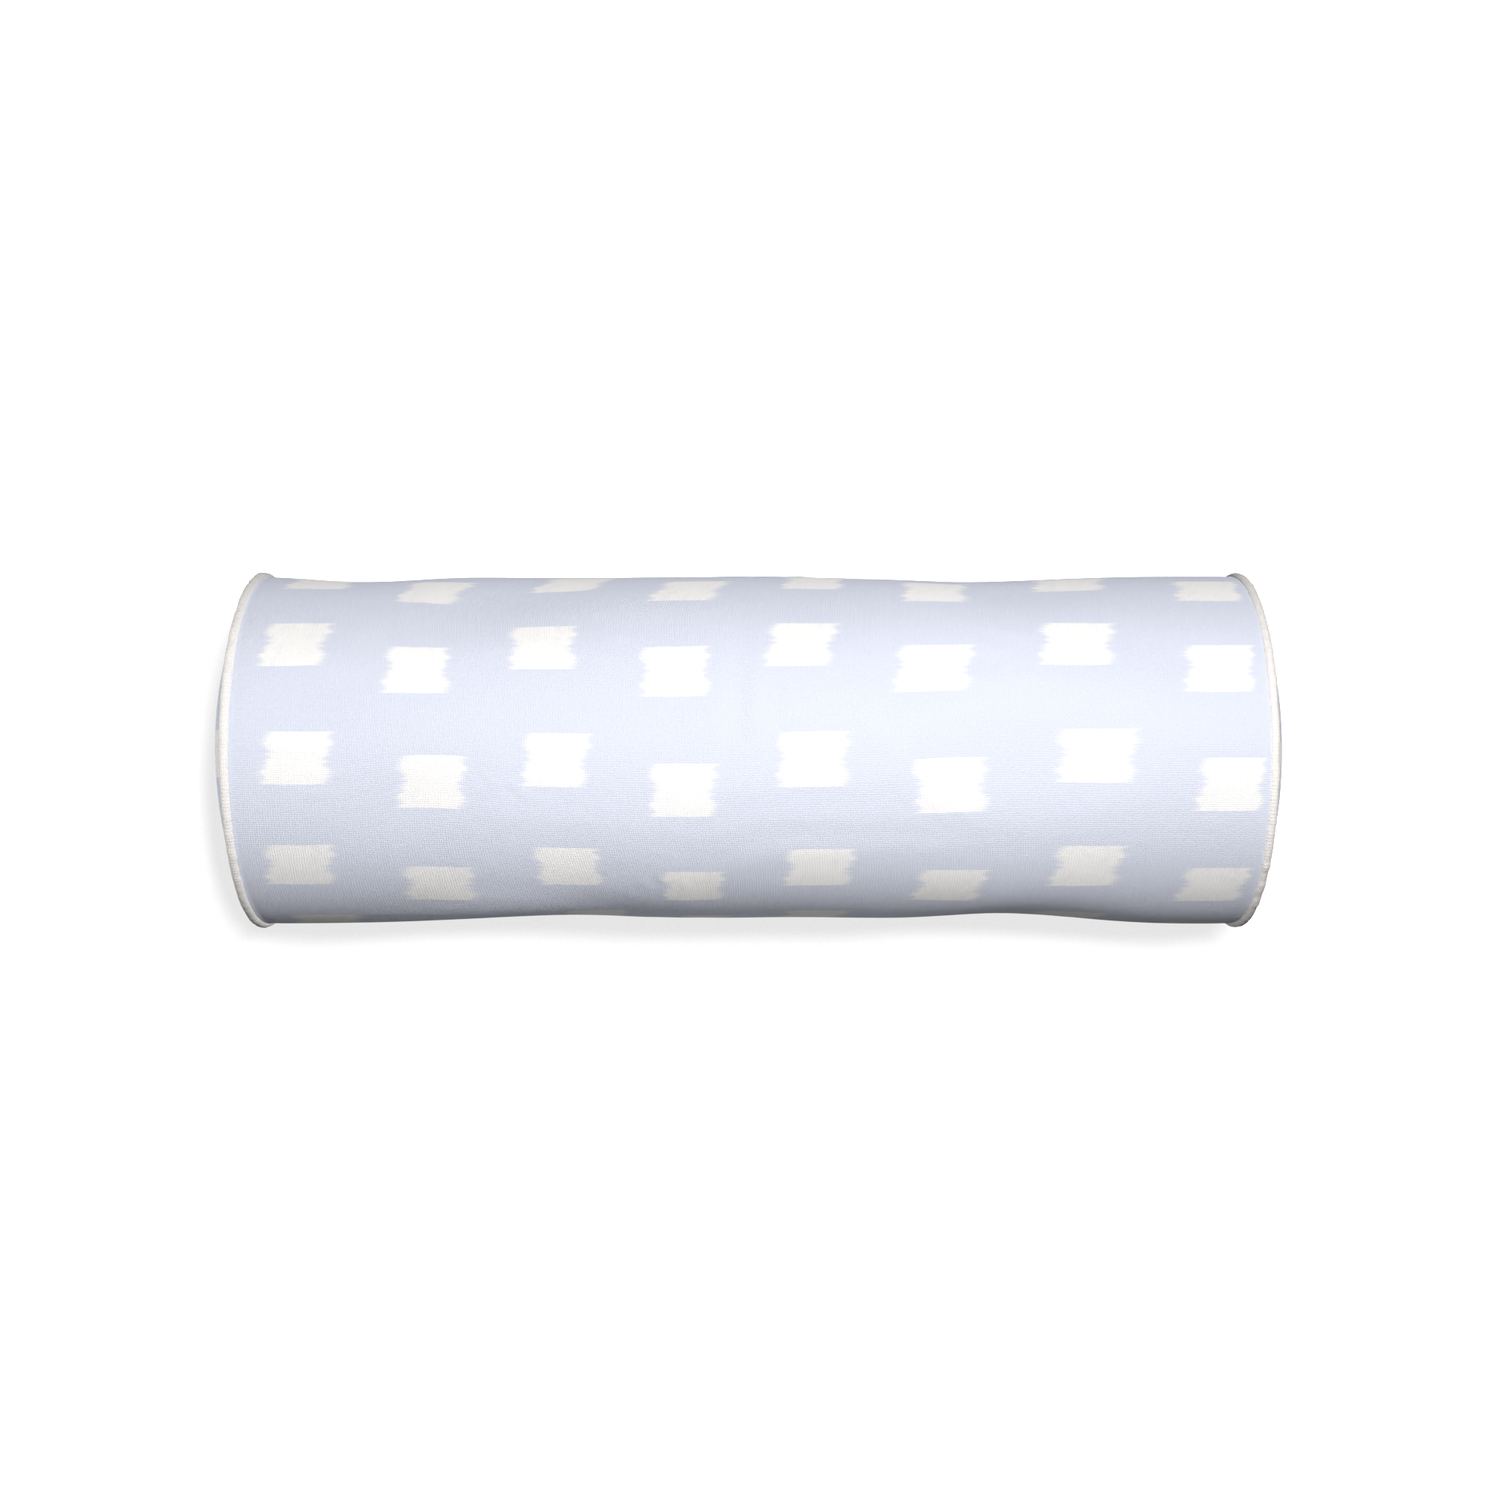 Bolster denton custom pillow with snow piping on white background